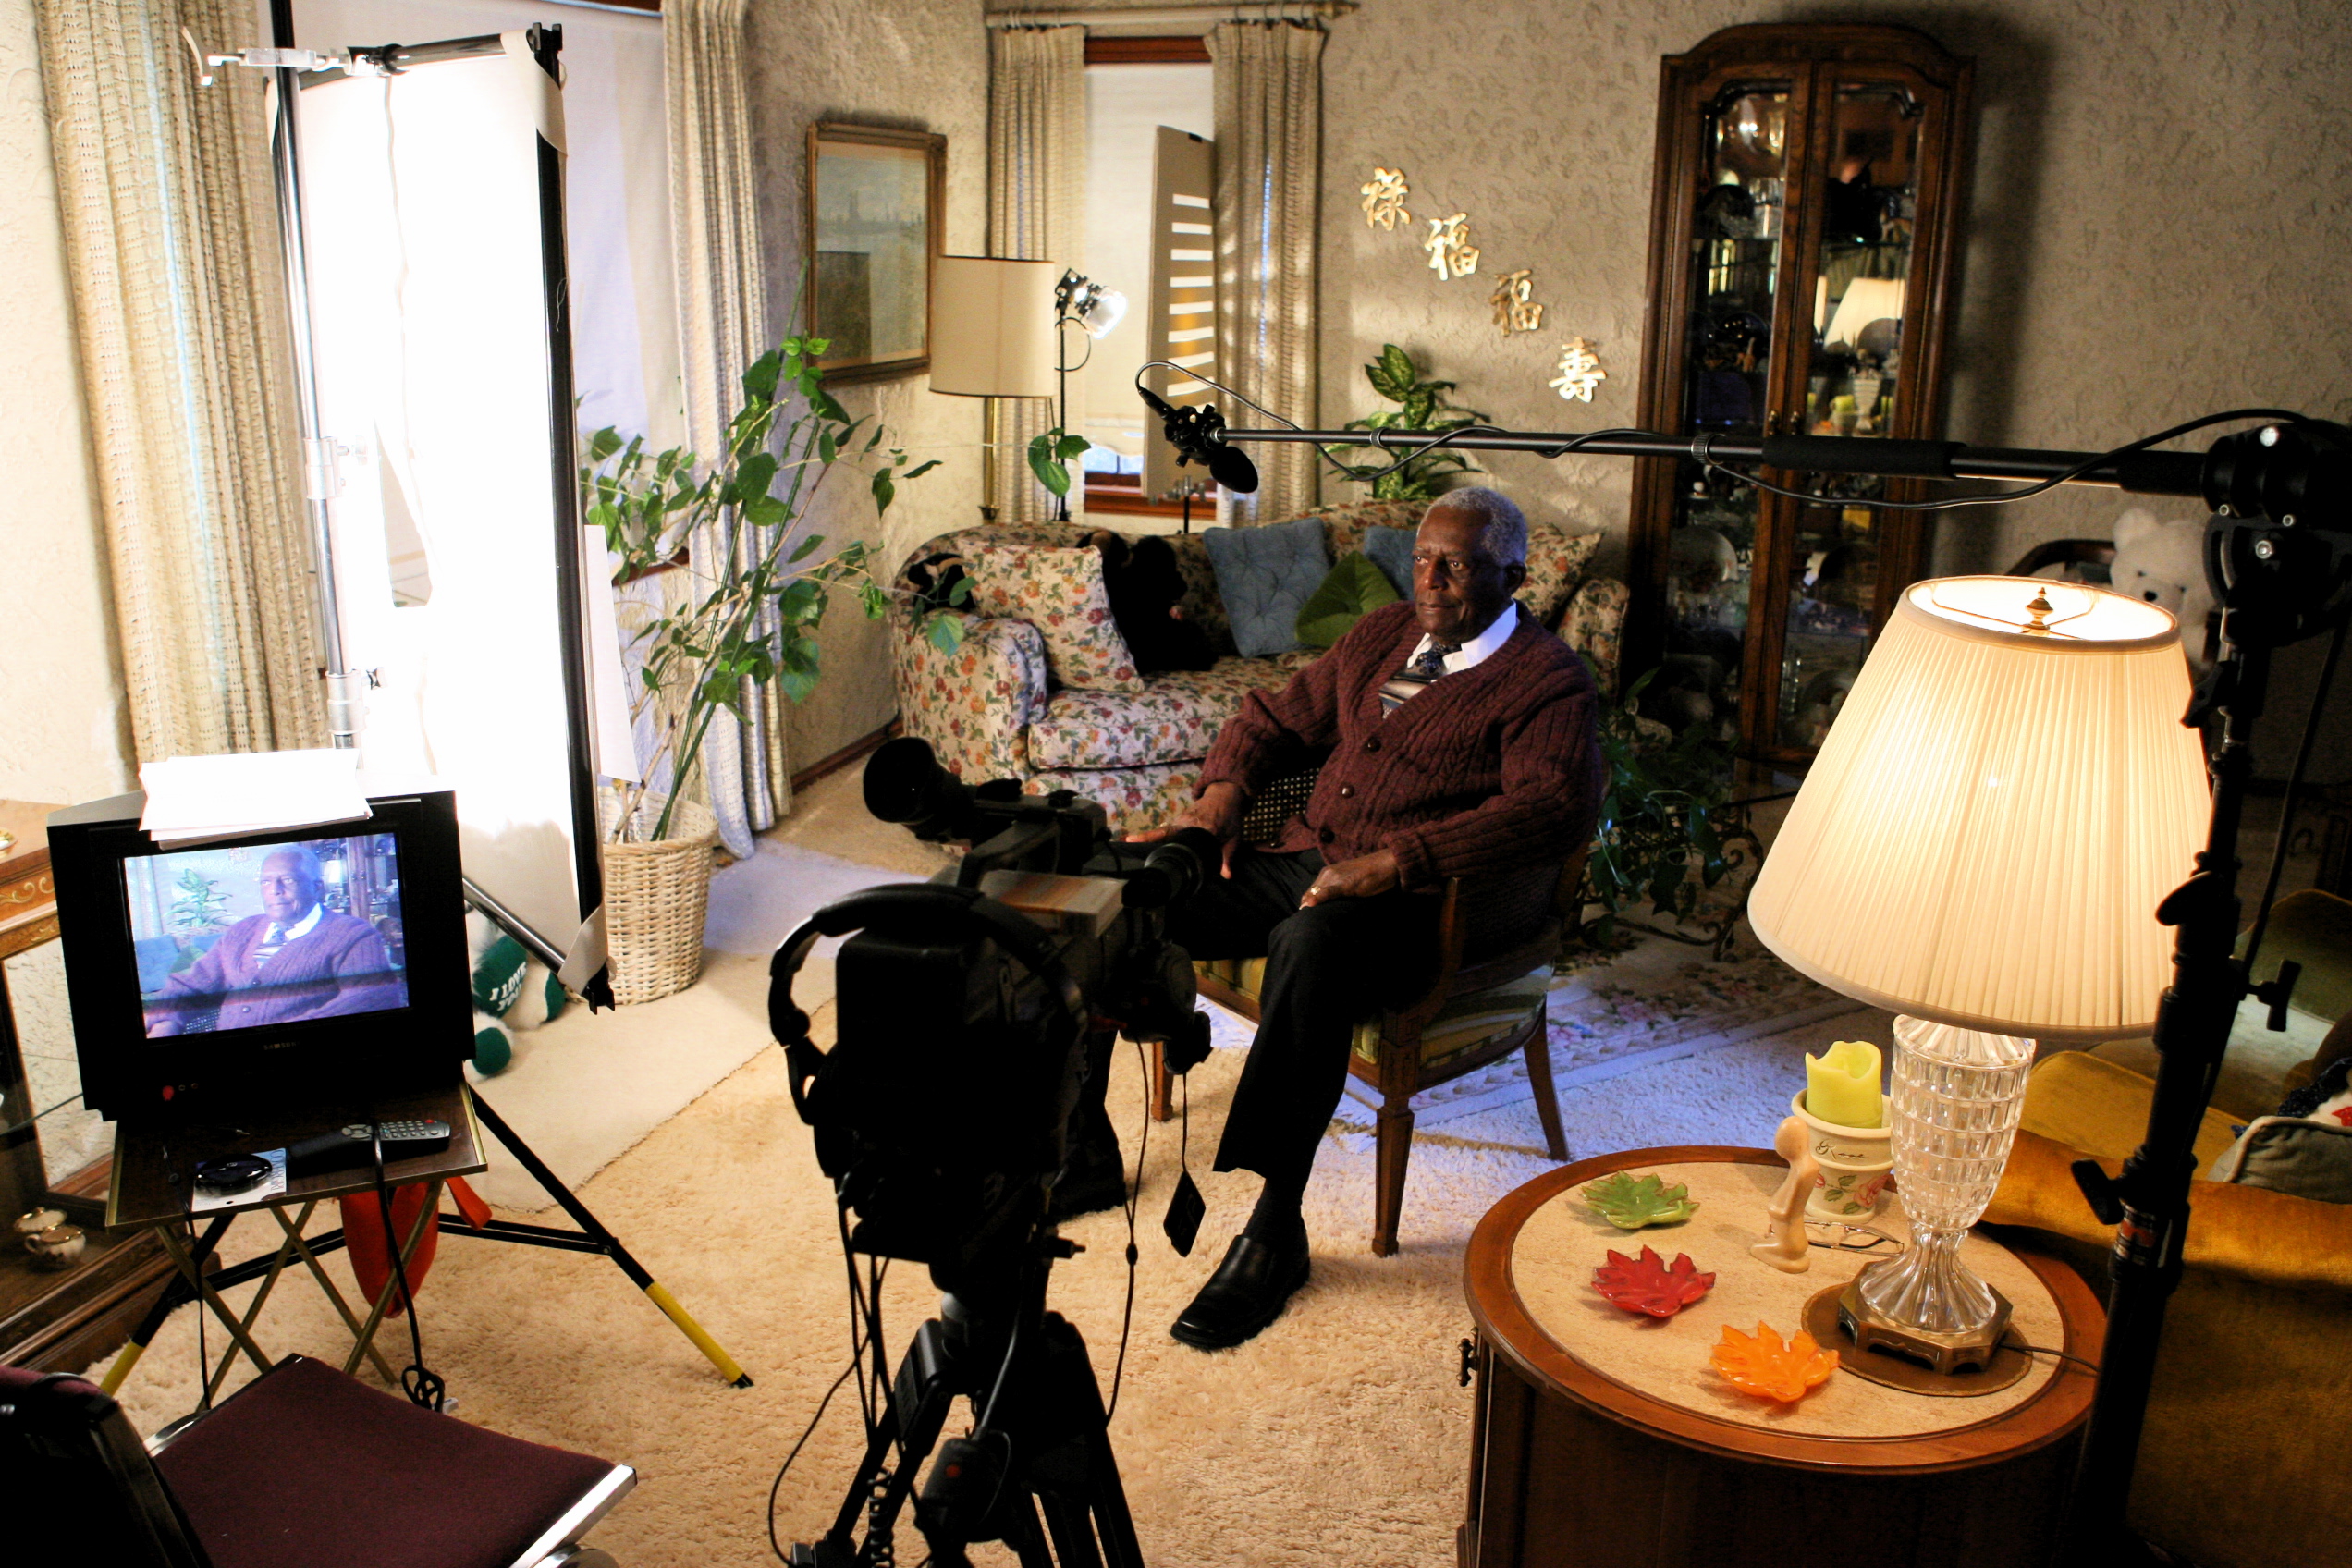 Senator Ulysses Lee Gooch, on the set of the biography I shot about his life.